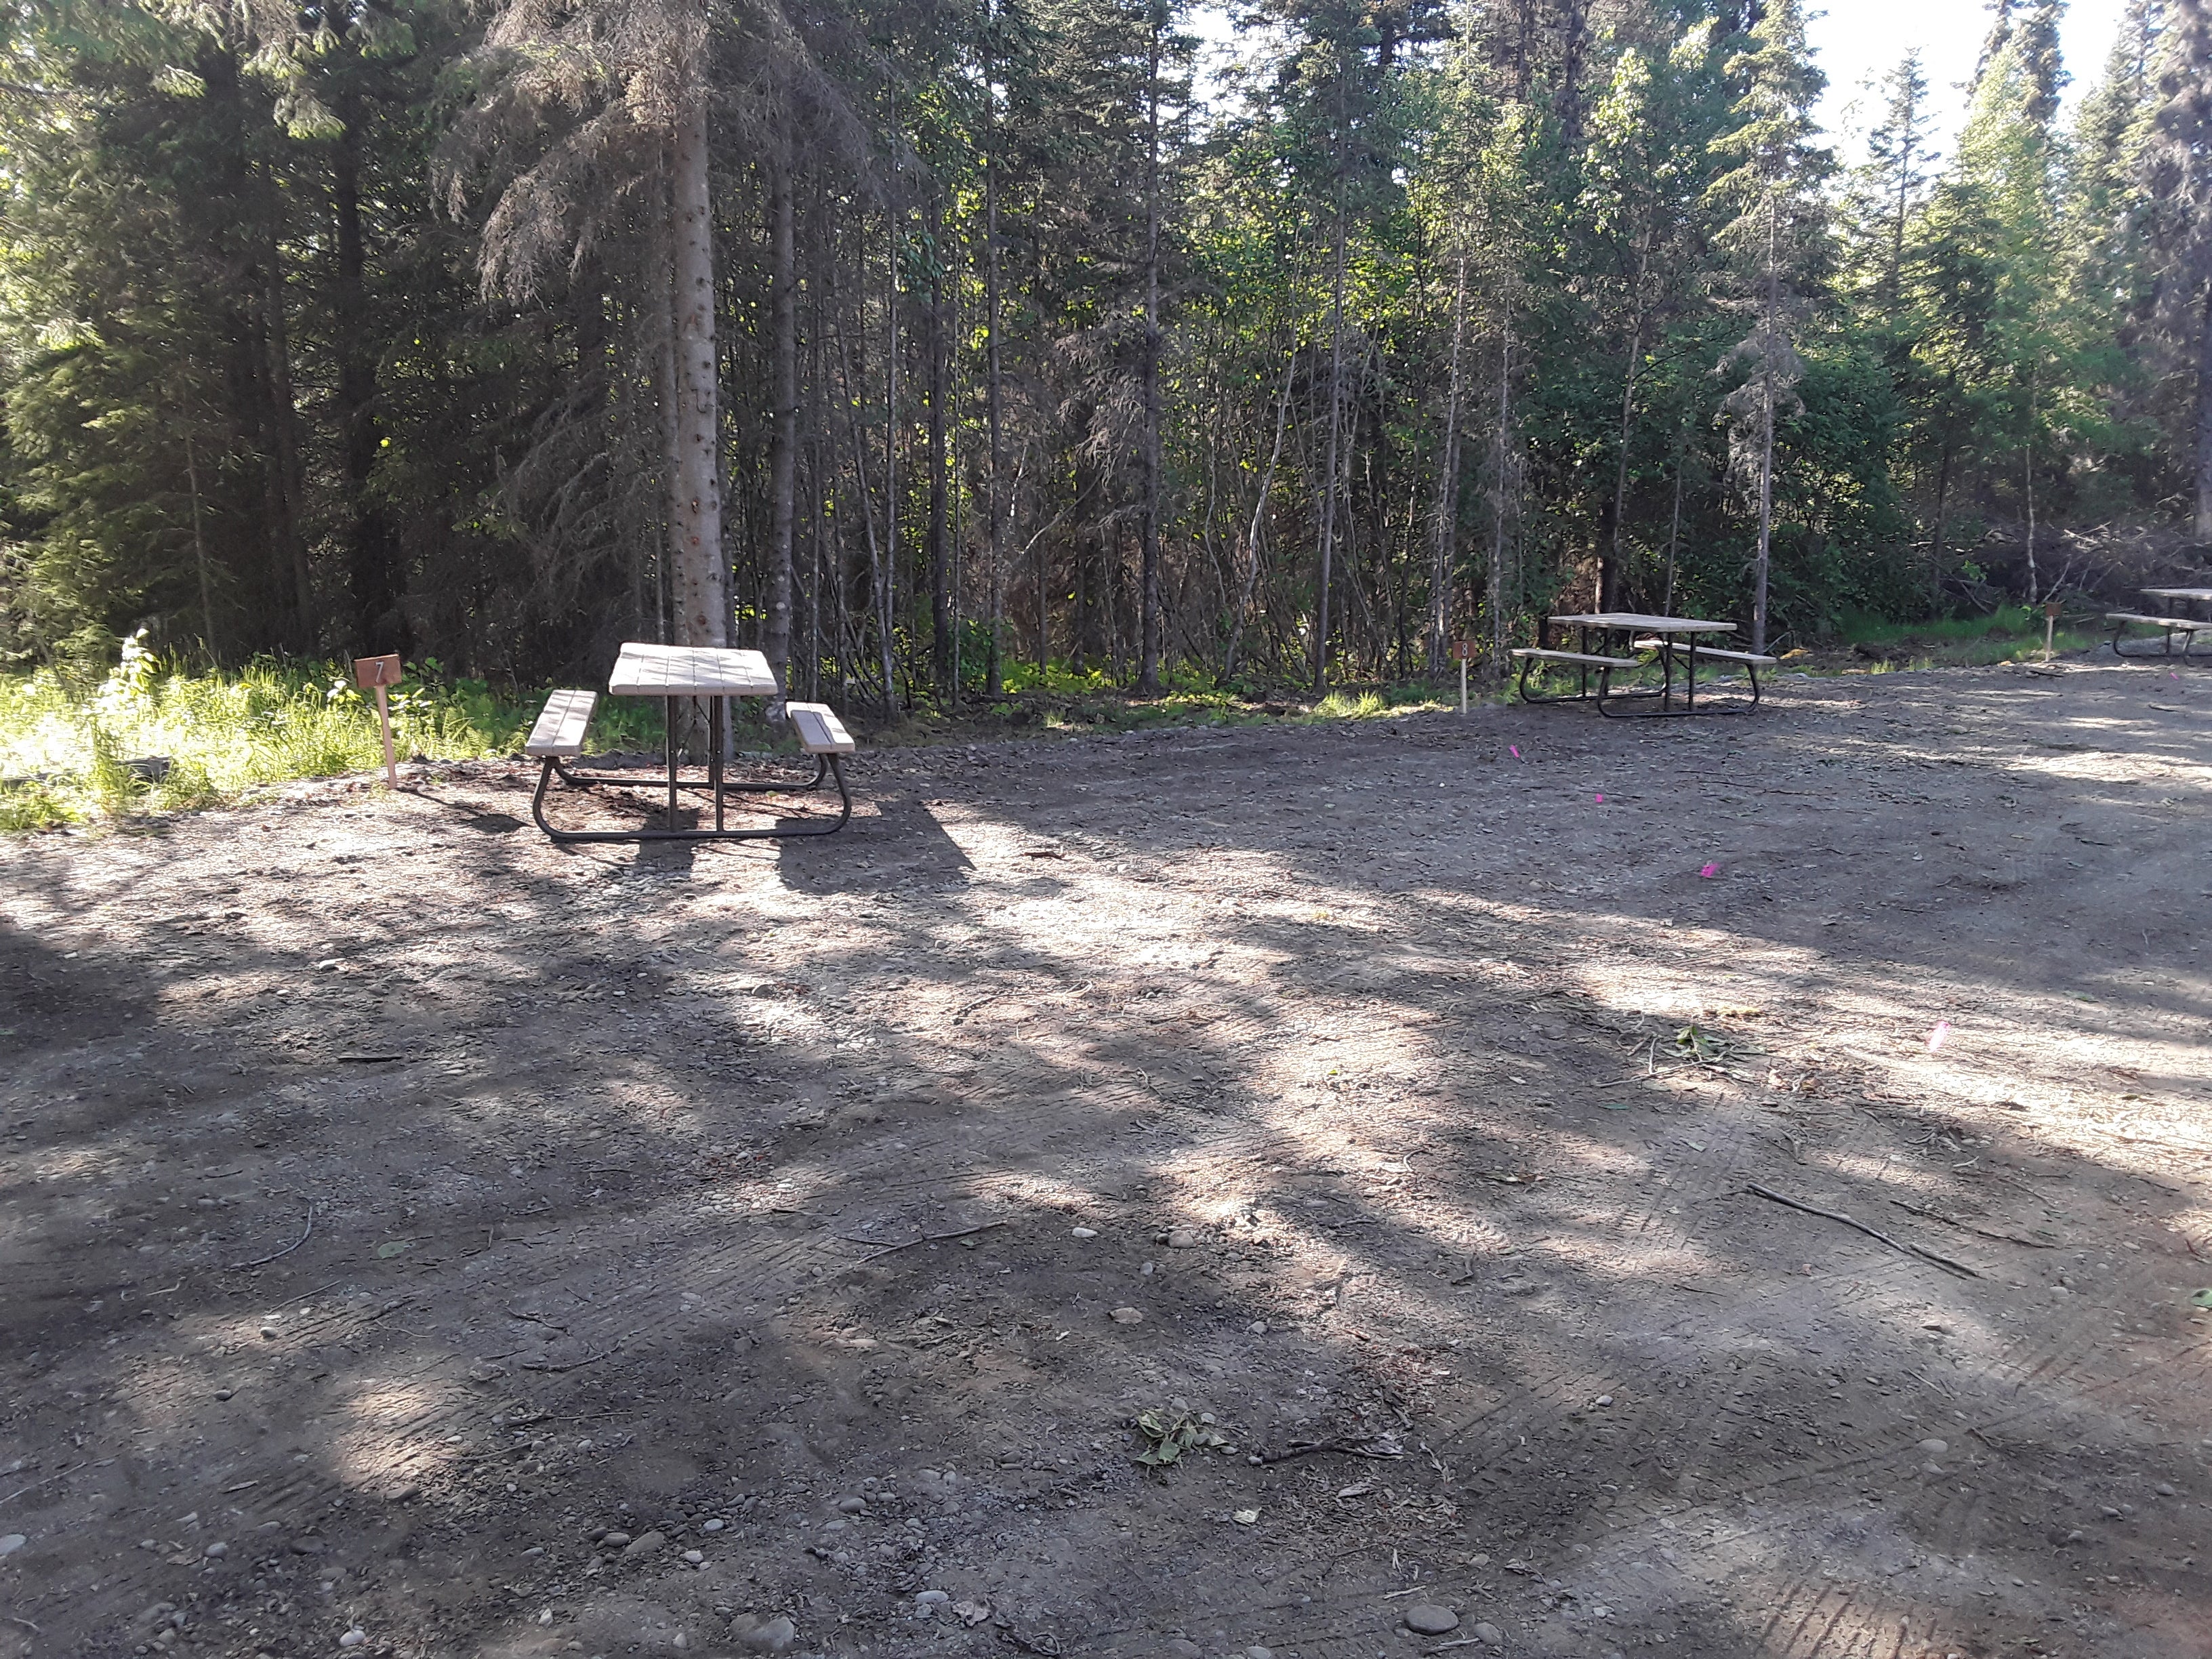 Our campground is bordered on all sides by a nice thick tree line.